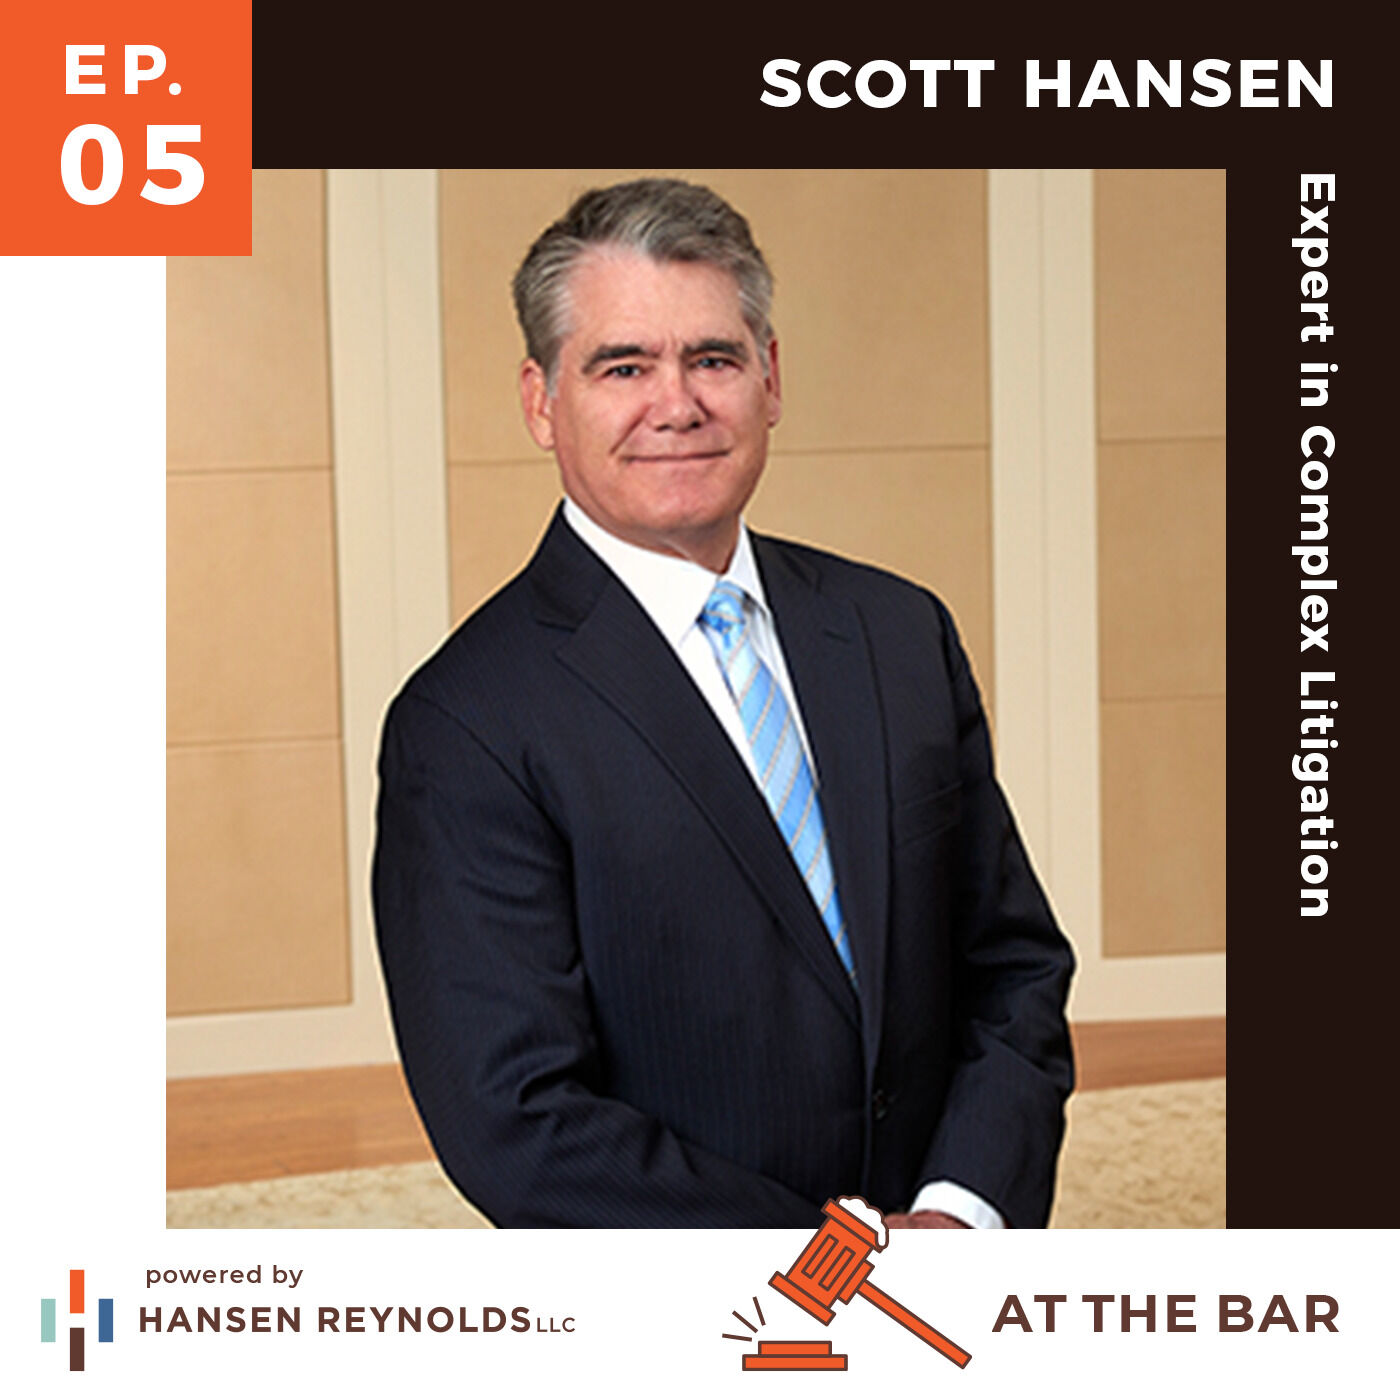 At the Bar episode four cover with Scott Hansen